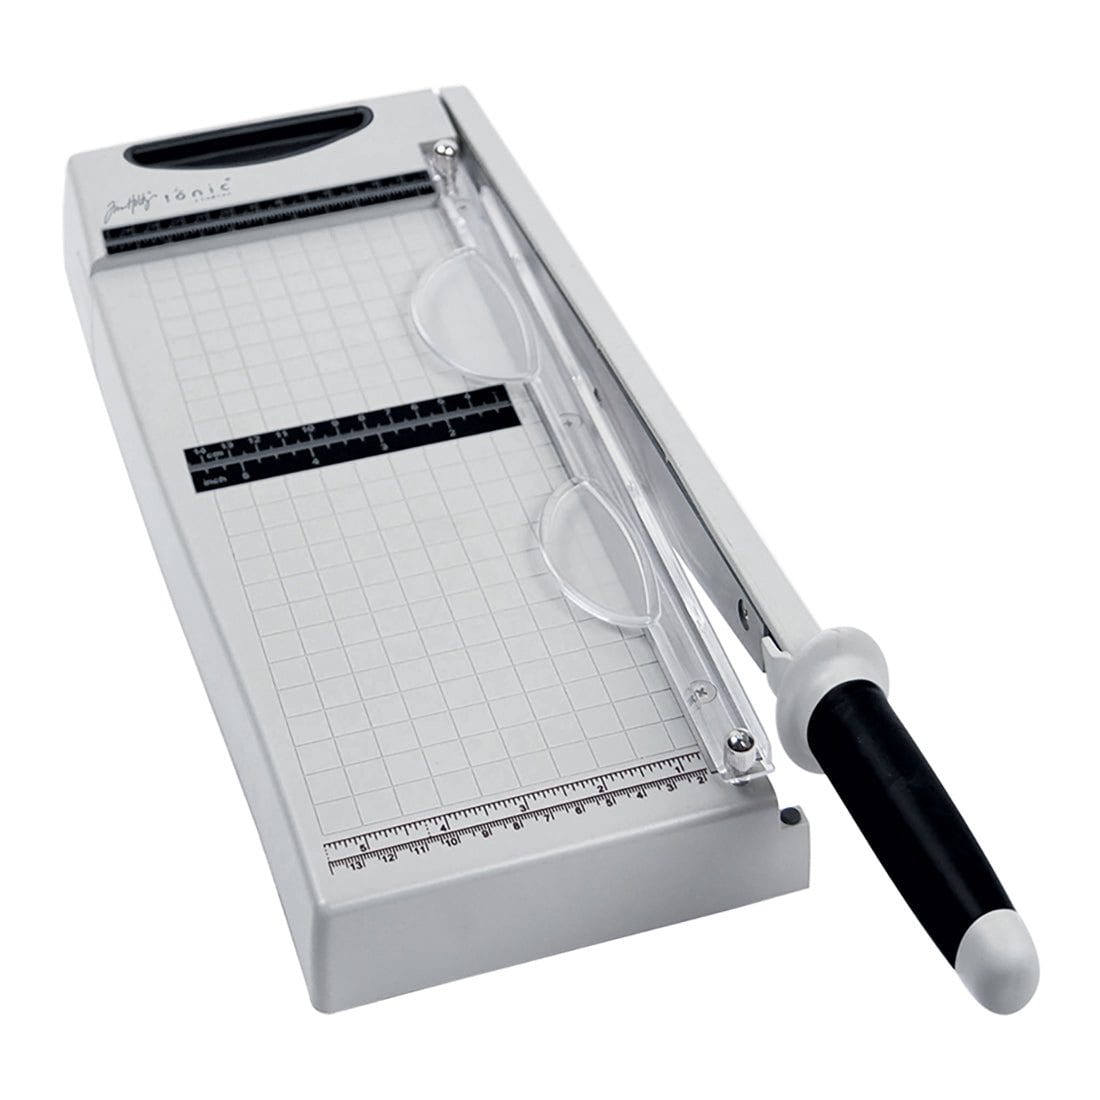 Buy Guillo-Max 17 Guillotine Stack Paper Cutter (360 Sheets